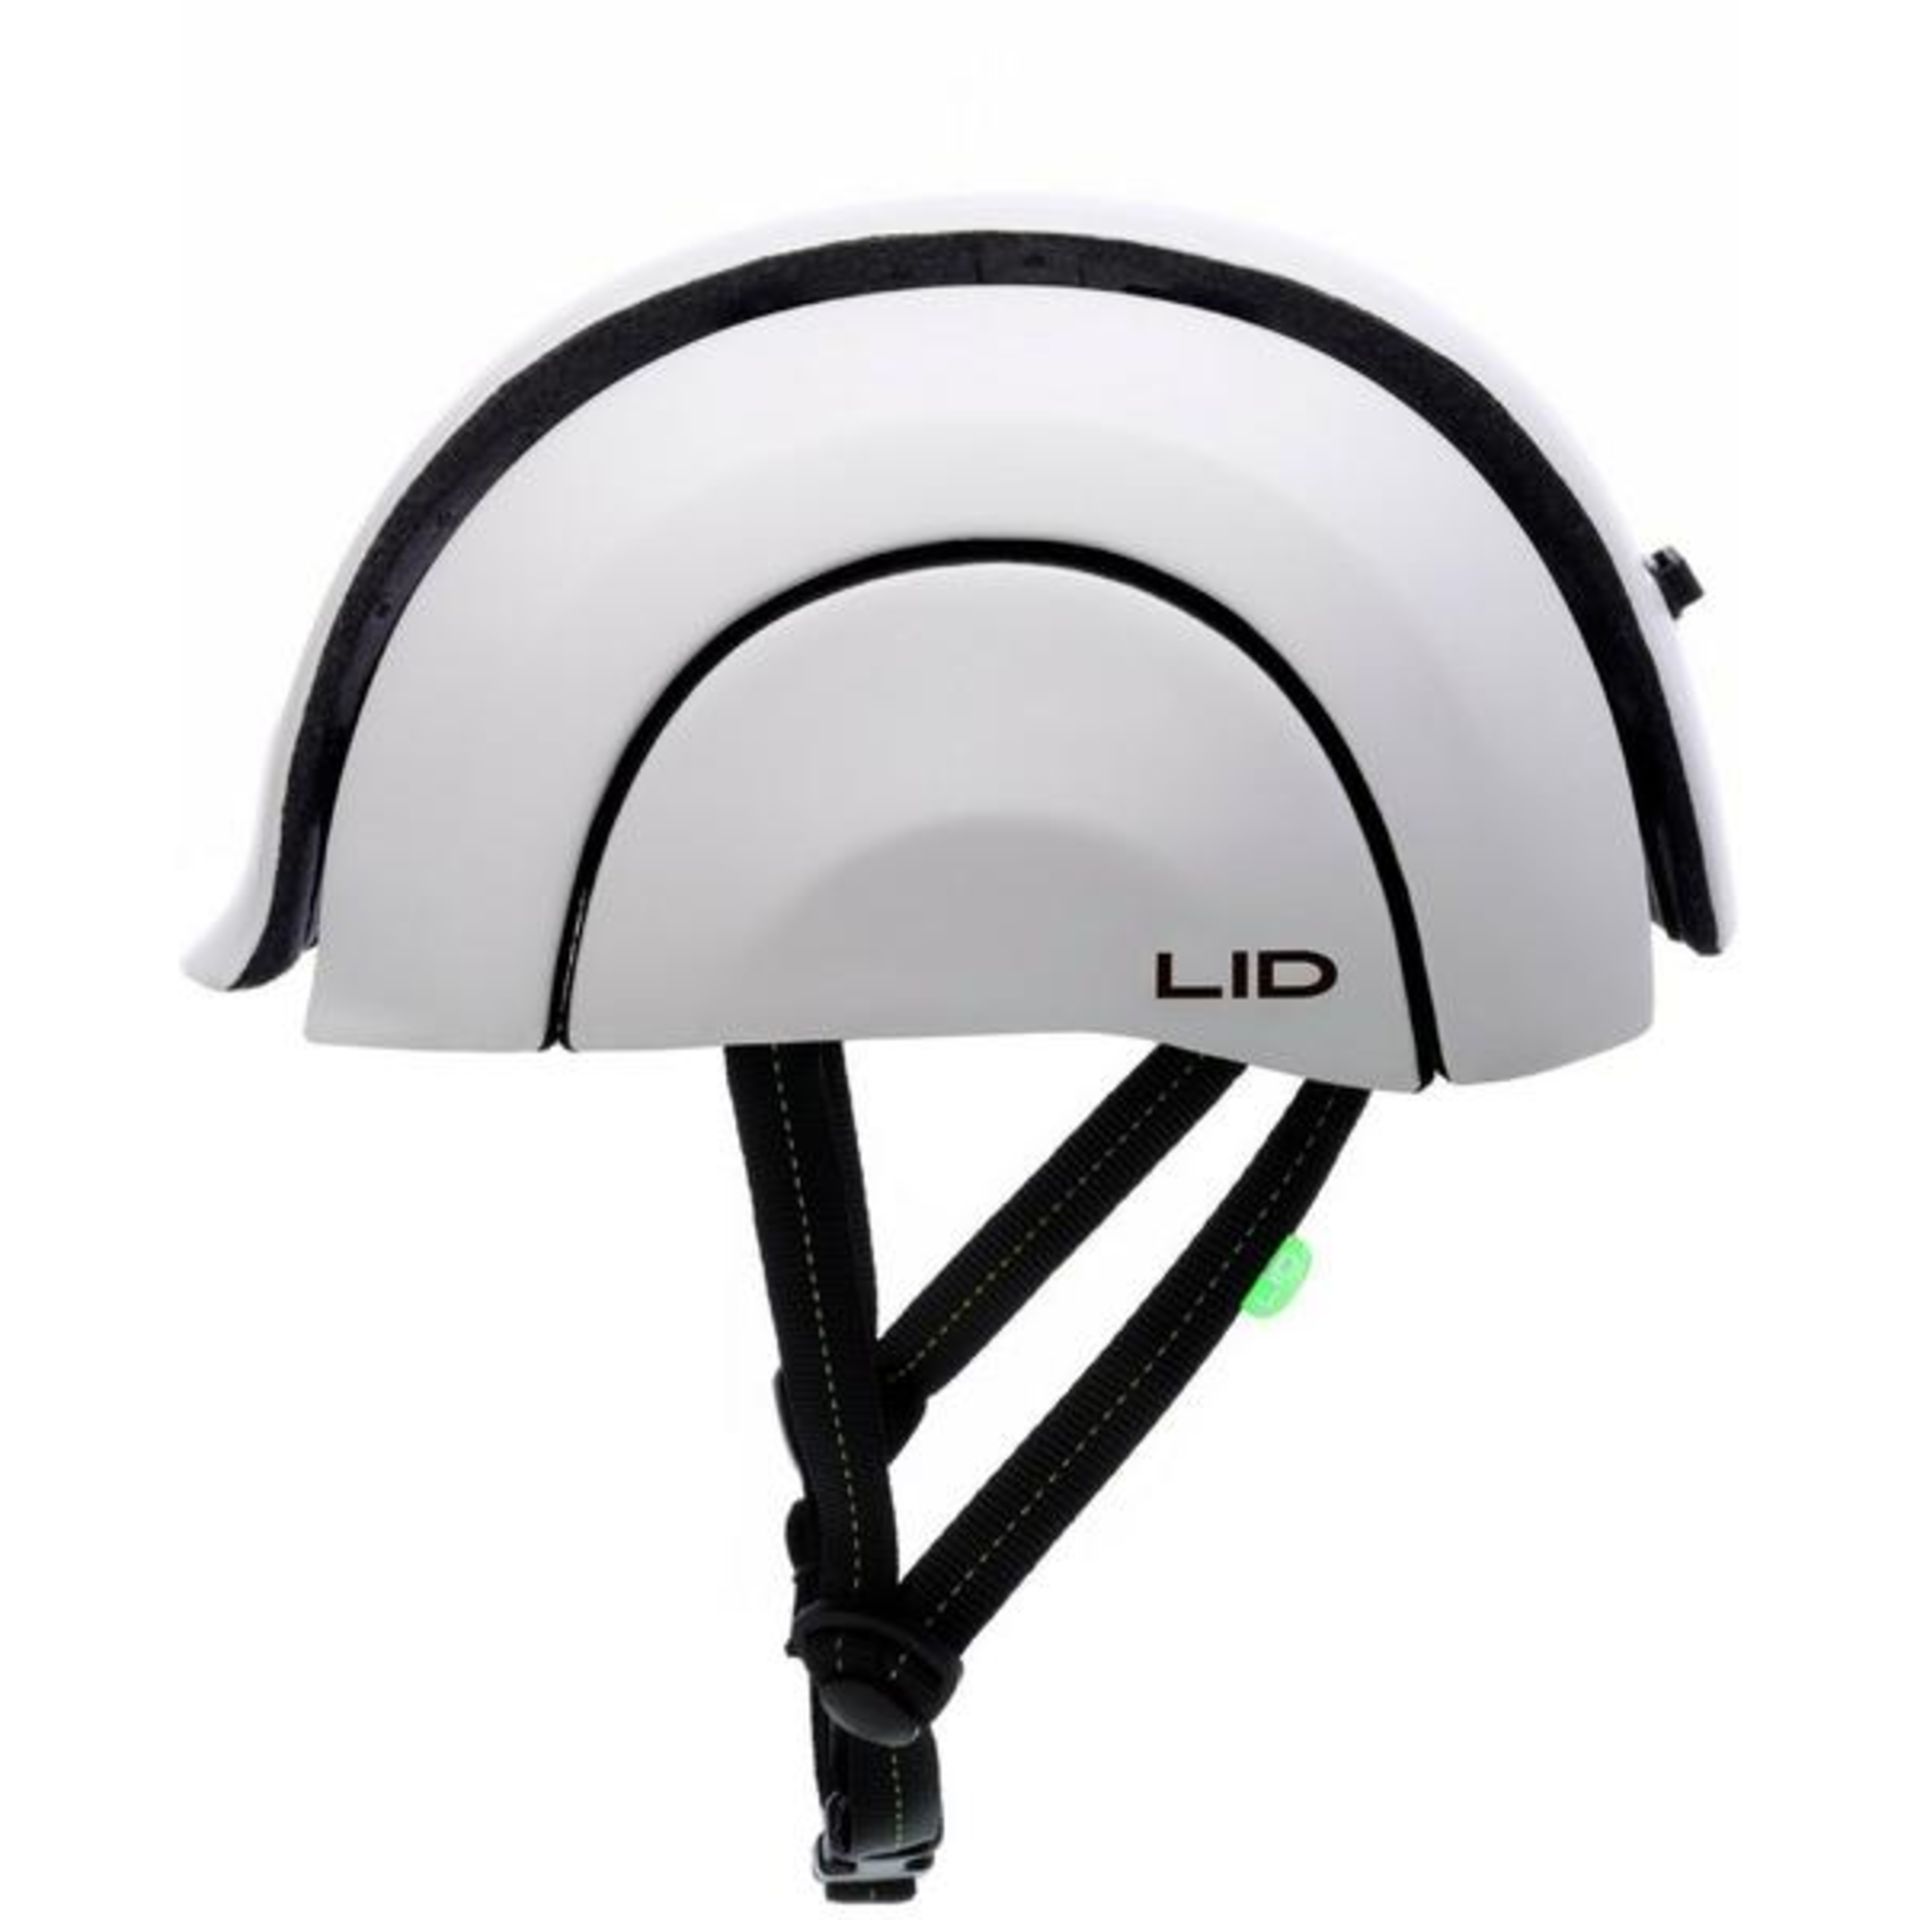 Lid Helmet Liquidation - Over £153k at retail - All new and boxed - Image 5 of 23